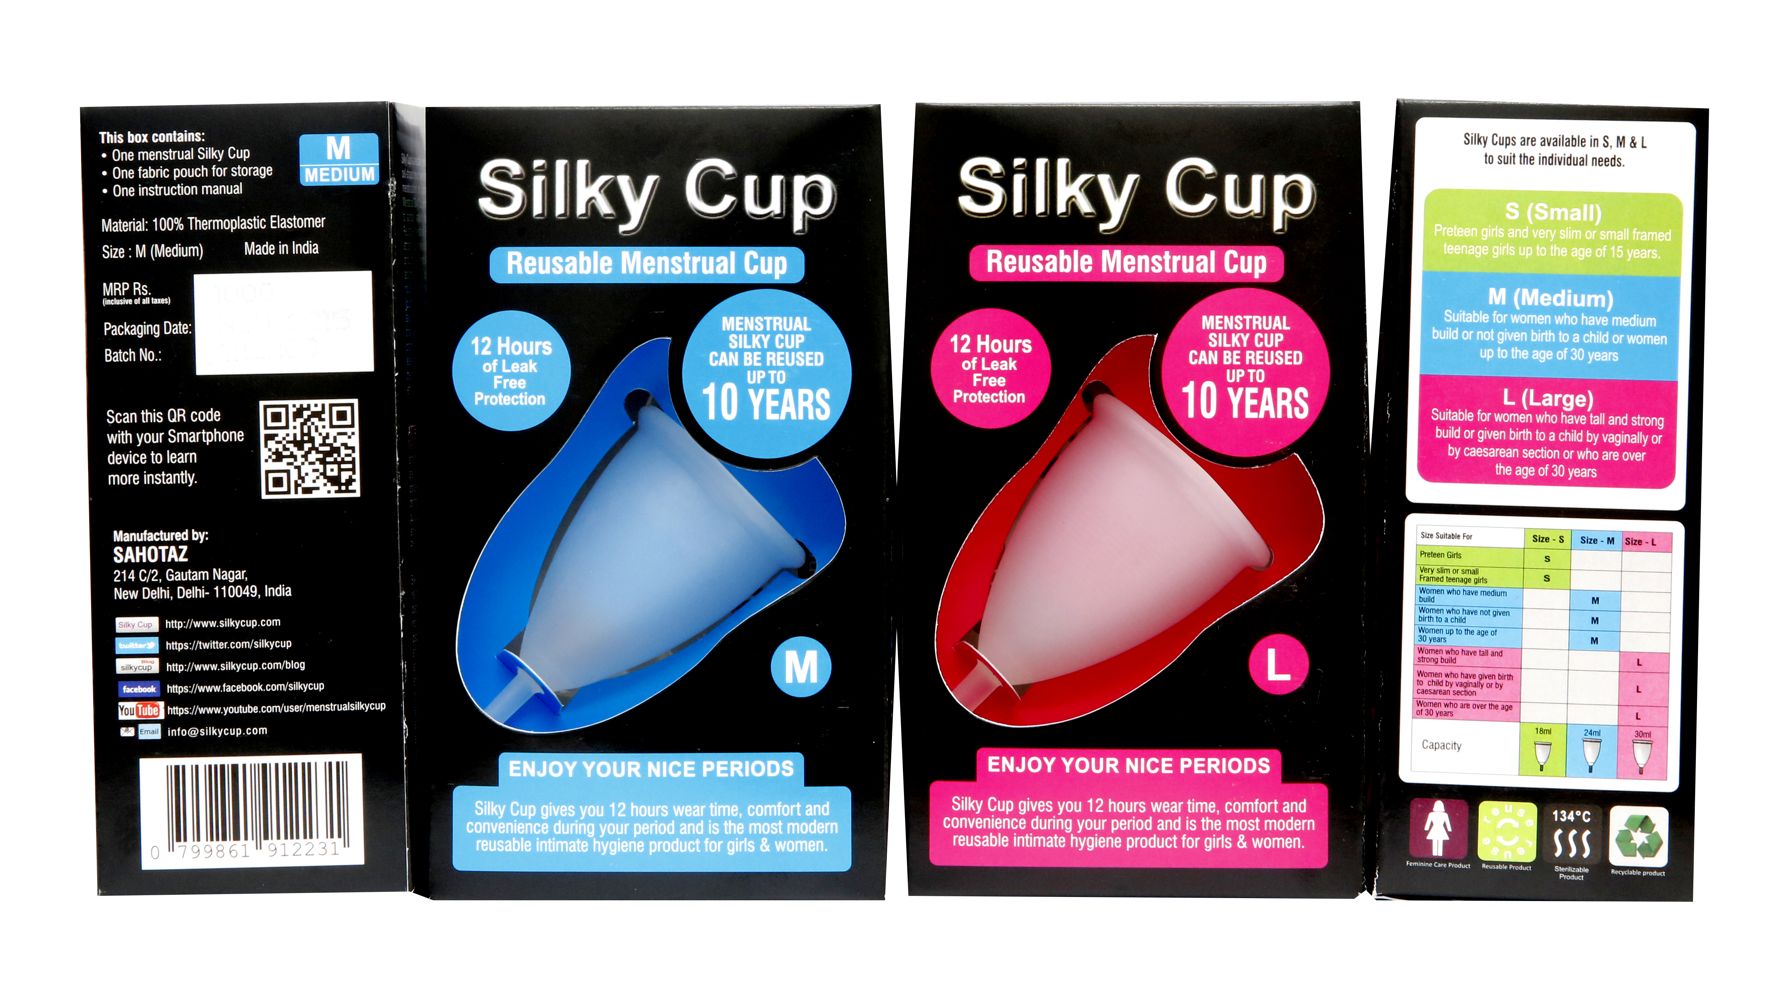 Silky Cup Menstrual Cup Menstruation Cup Masikdharm Cup Period Cup Sanitary Cup Tampon Cup